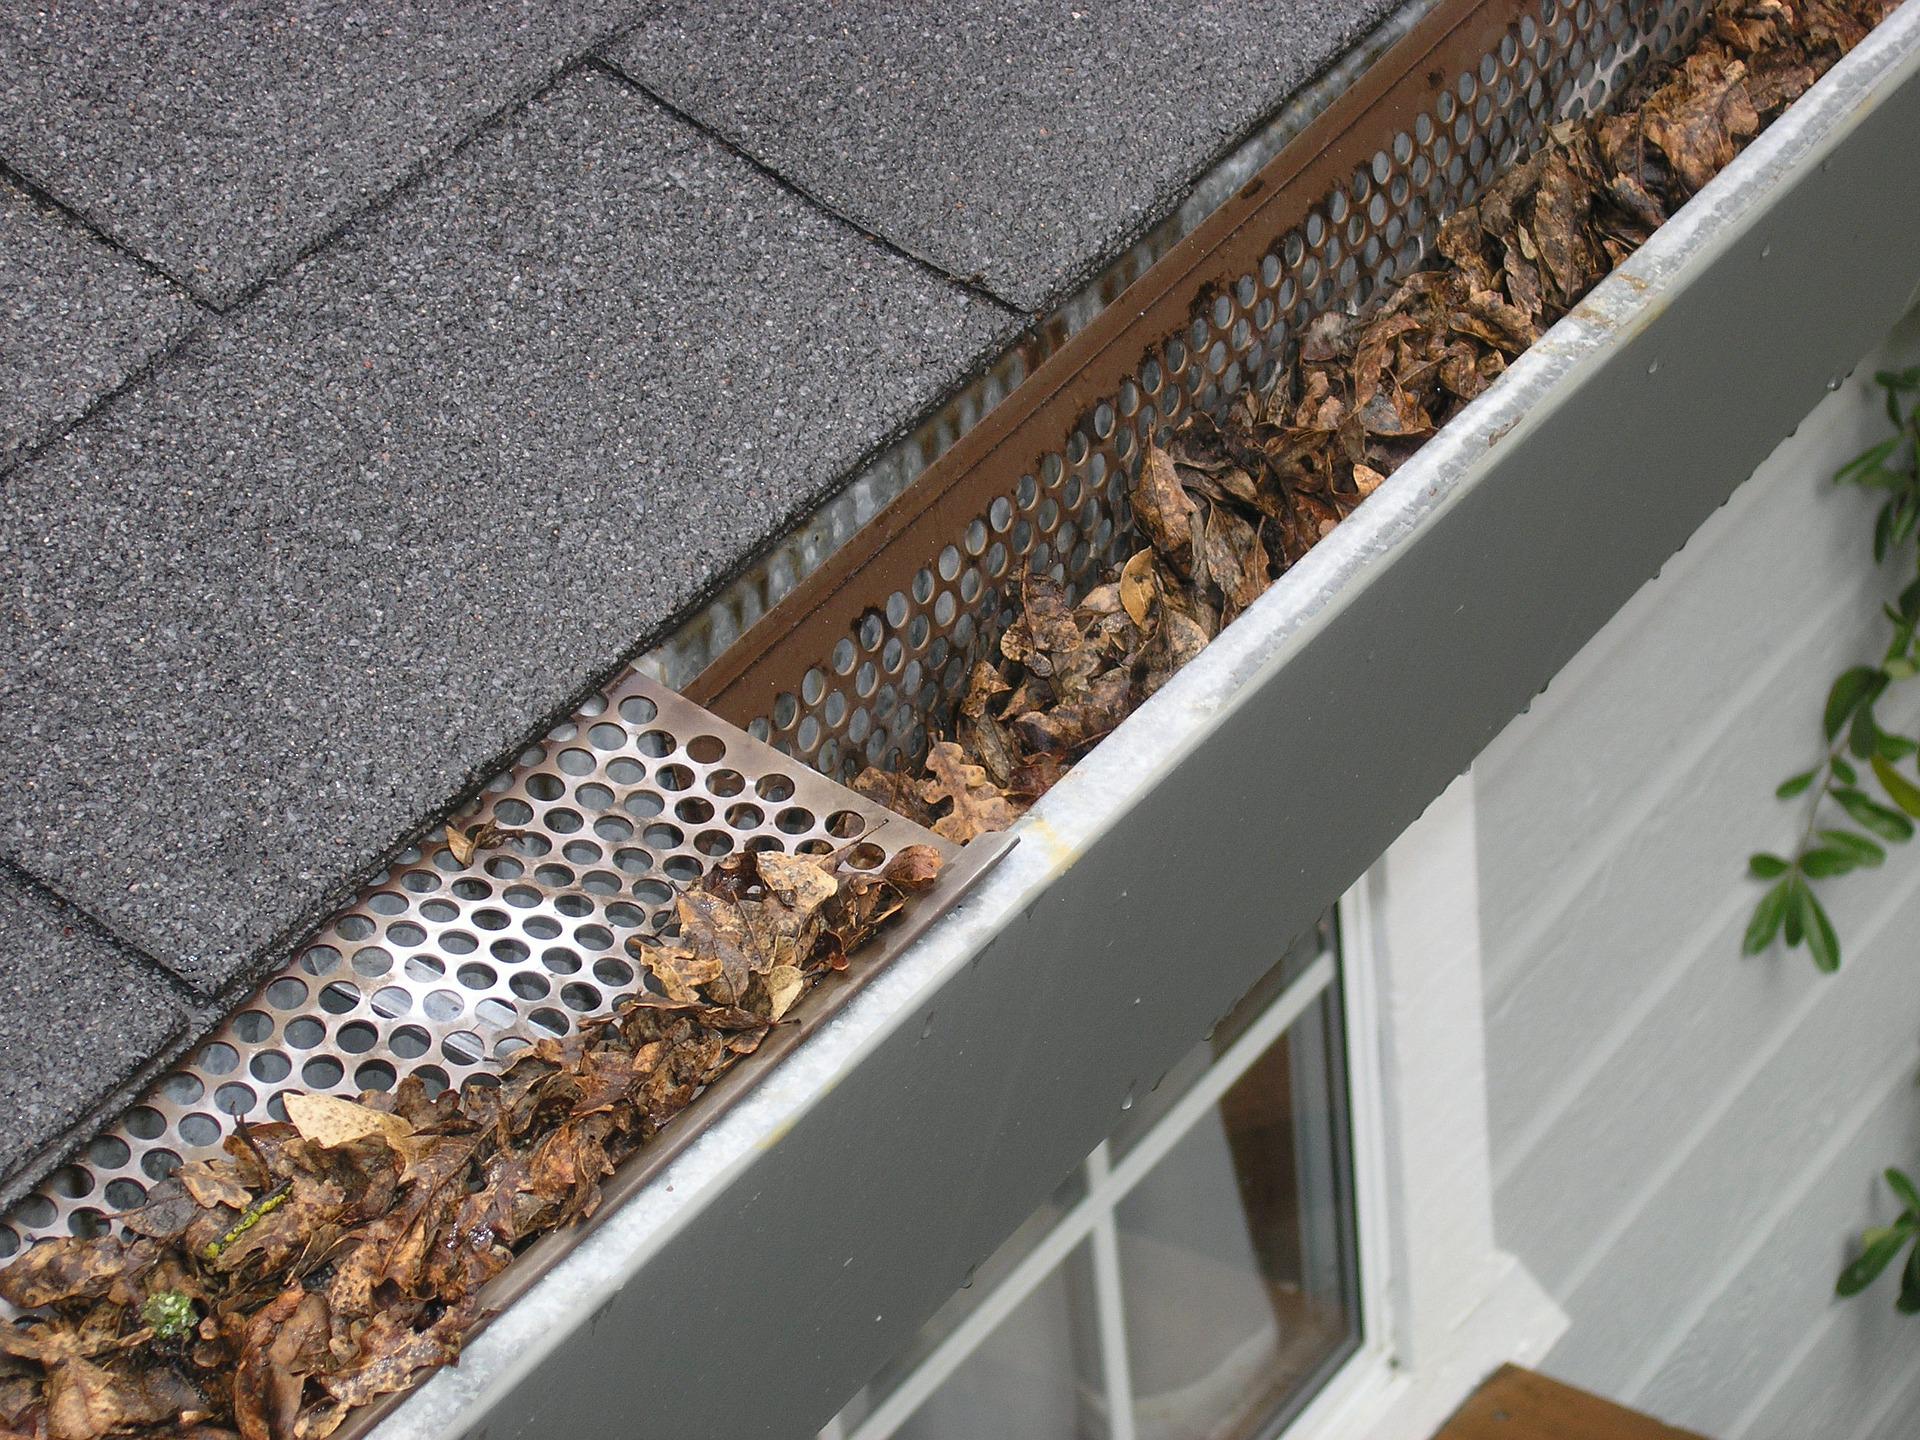 dirty gutters on house attracting mosquitoes